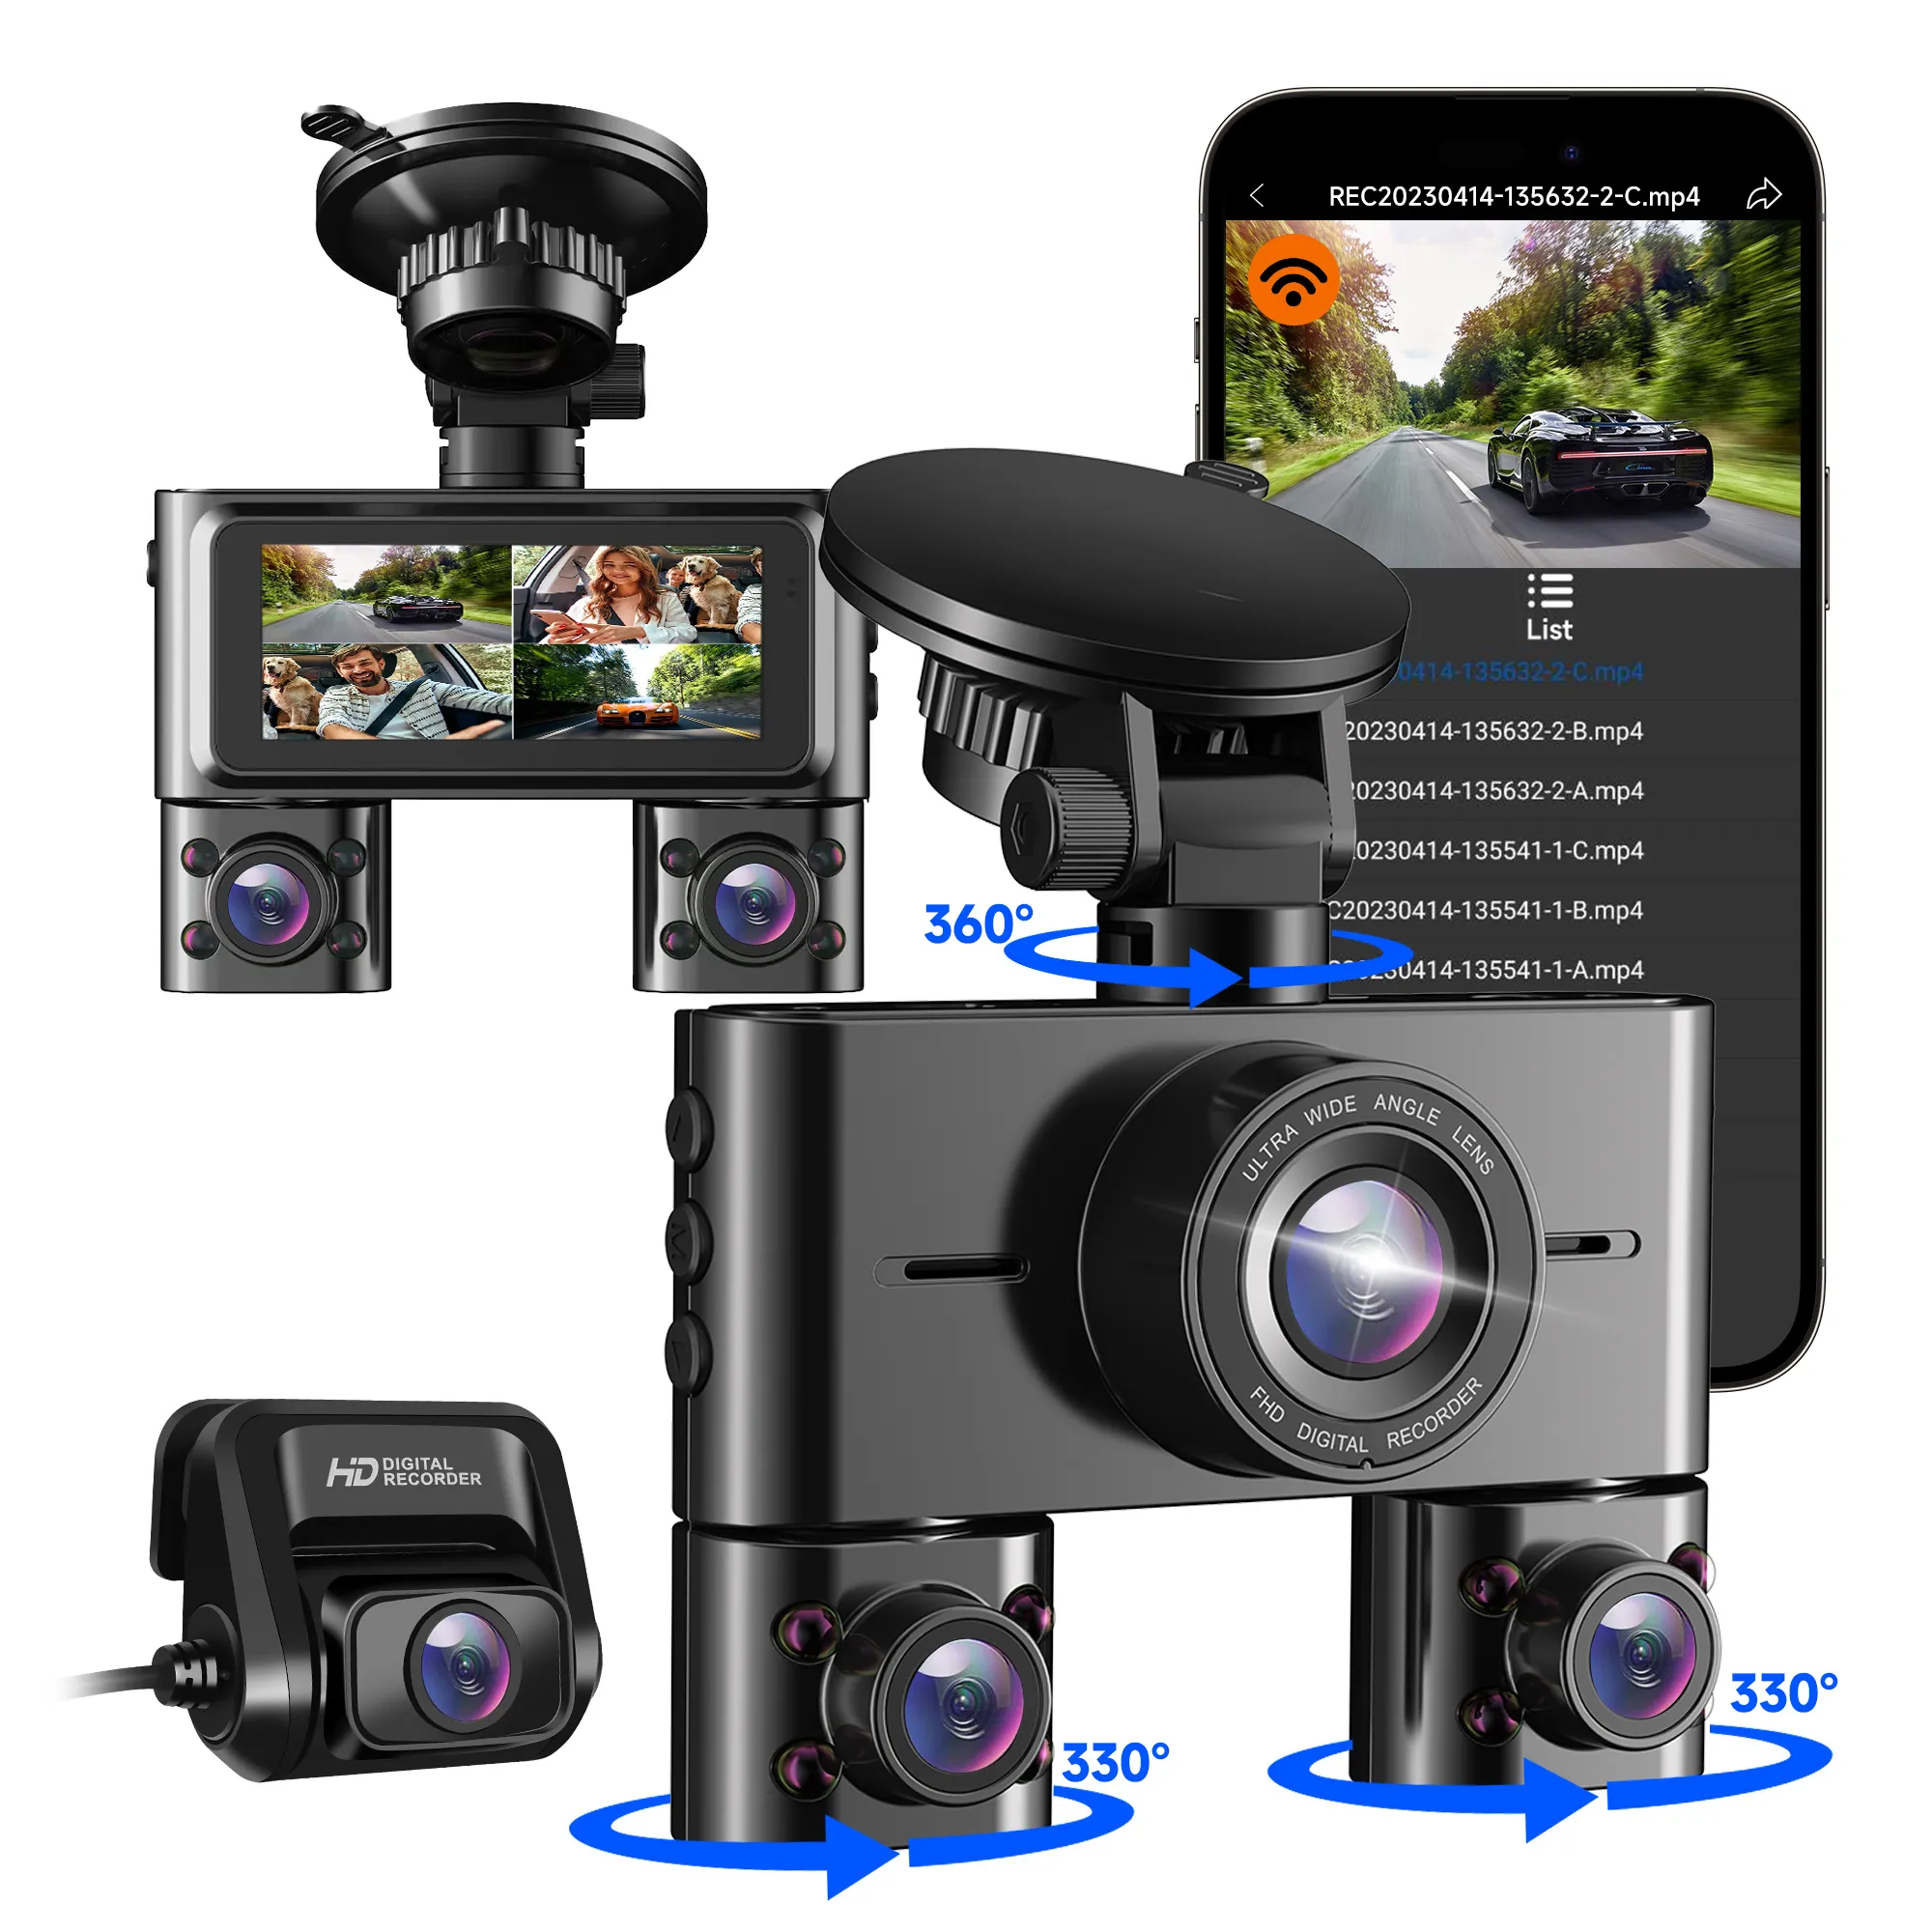 JHK V7 Mini 4 Channels 1080P Dashcam WiFi GPS 360 Degree Front and Rear Dash Cam Camera for Car